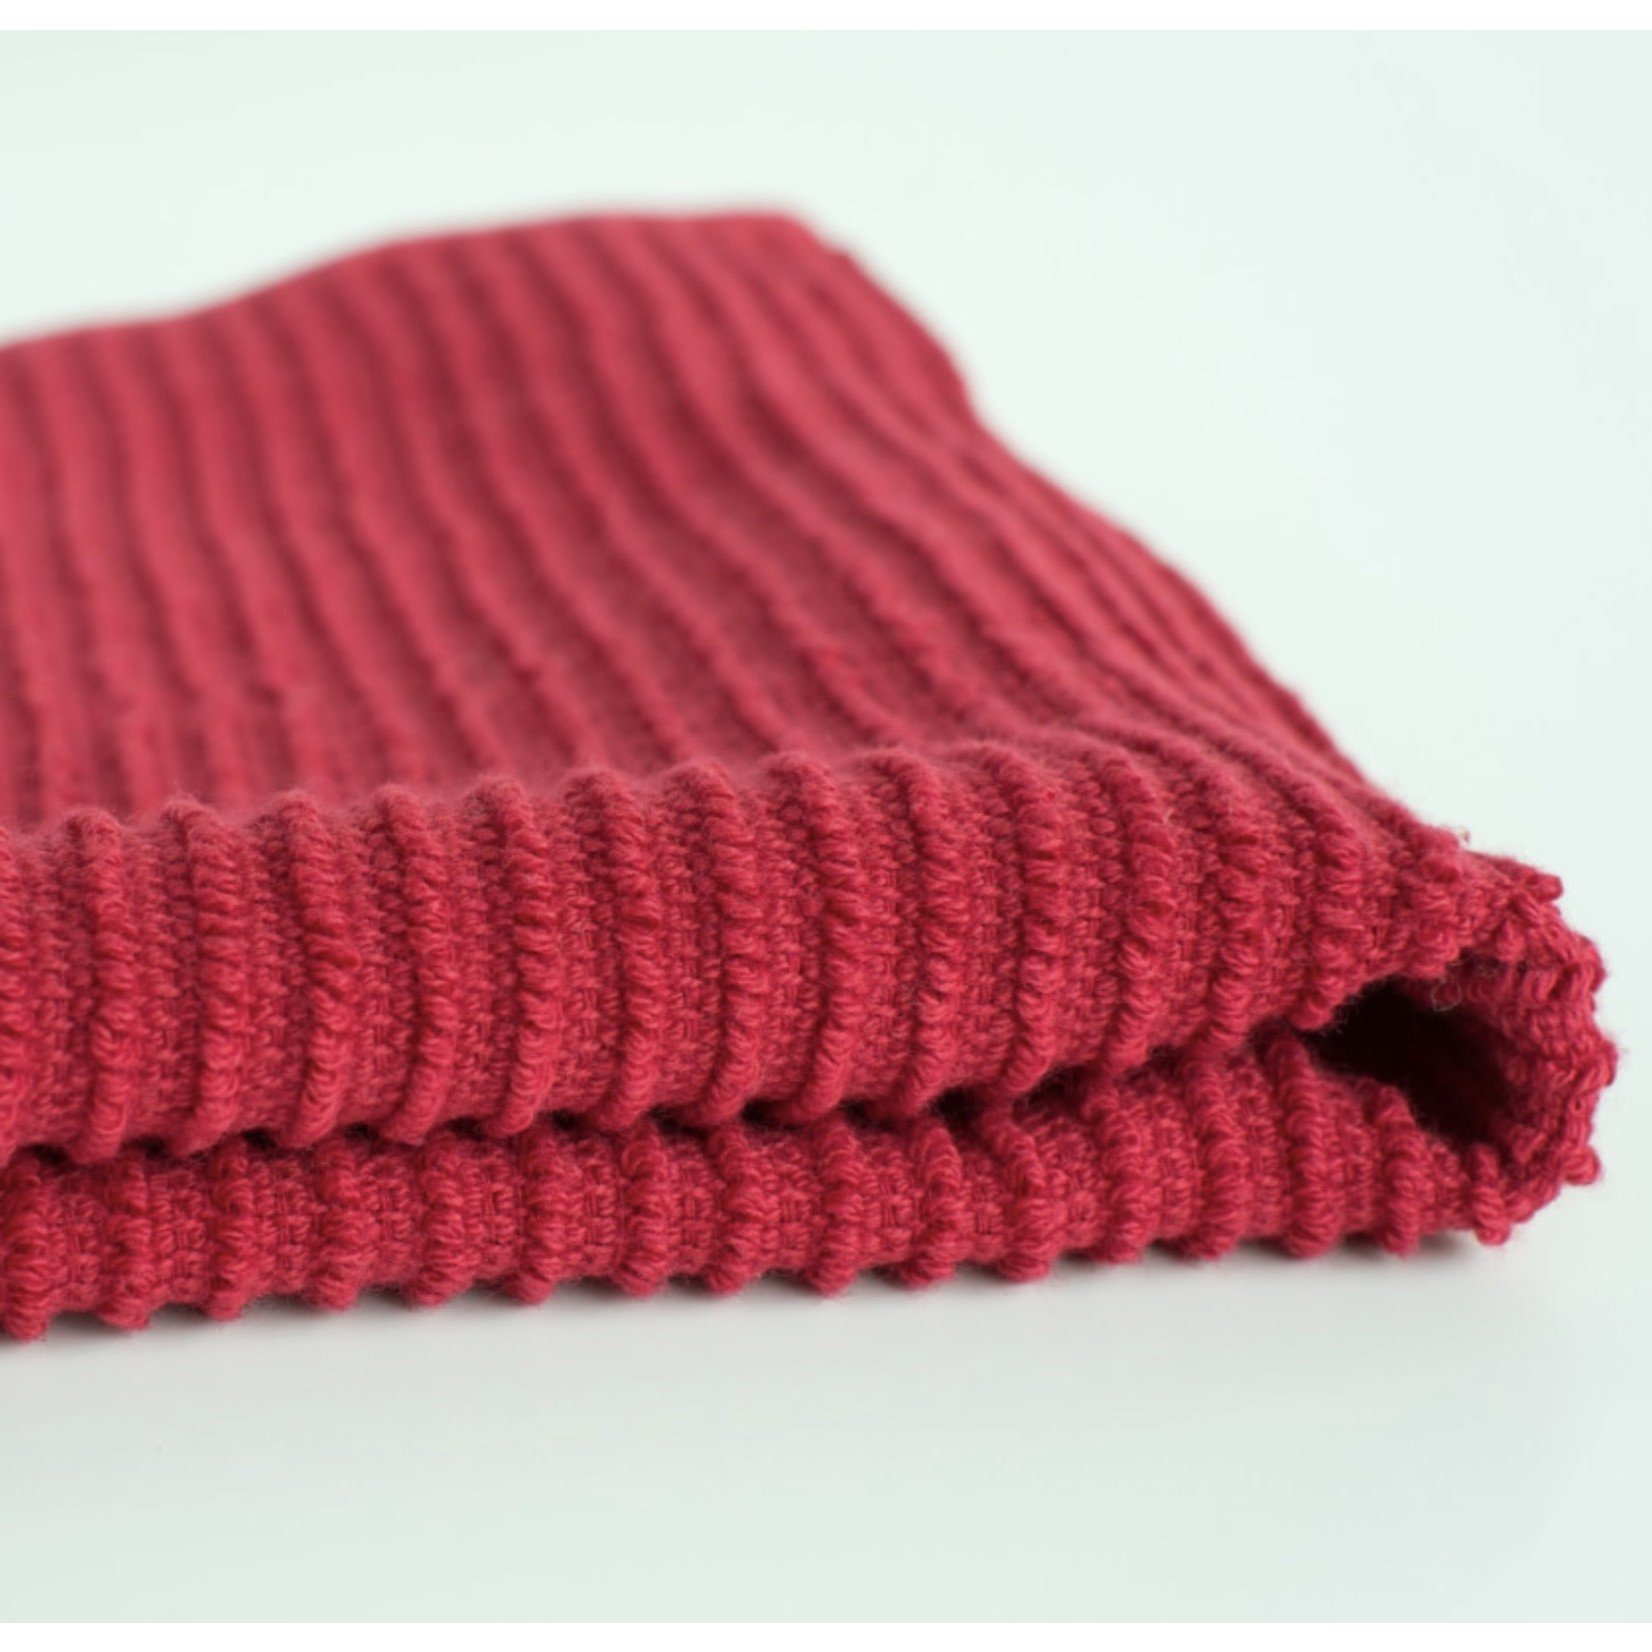 NOW DESIGNS NOW DESIGNS Ripple Dishcloth S/2 - Red